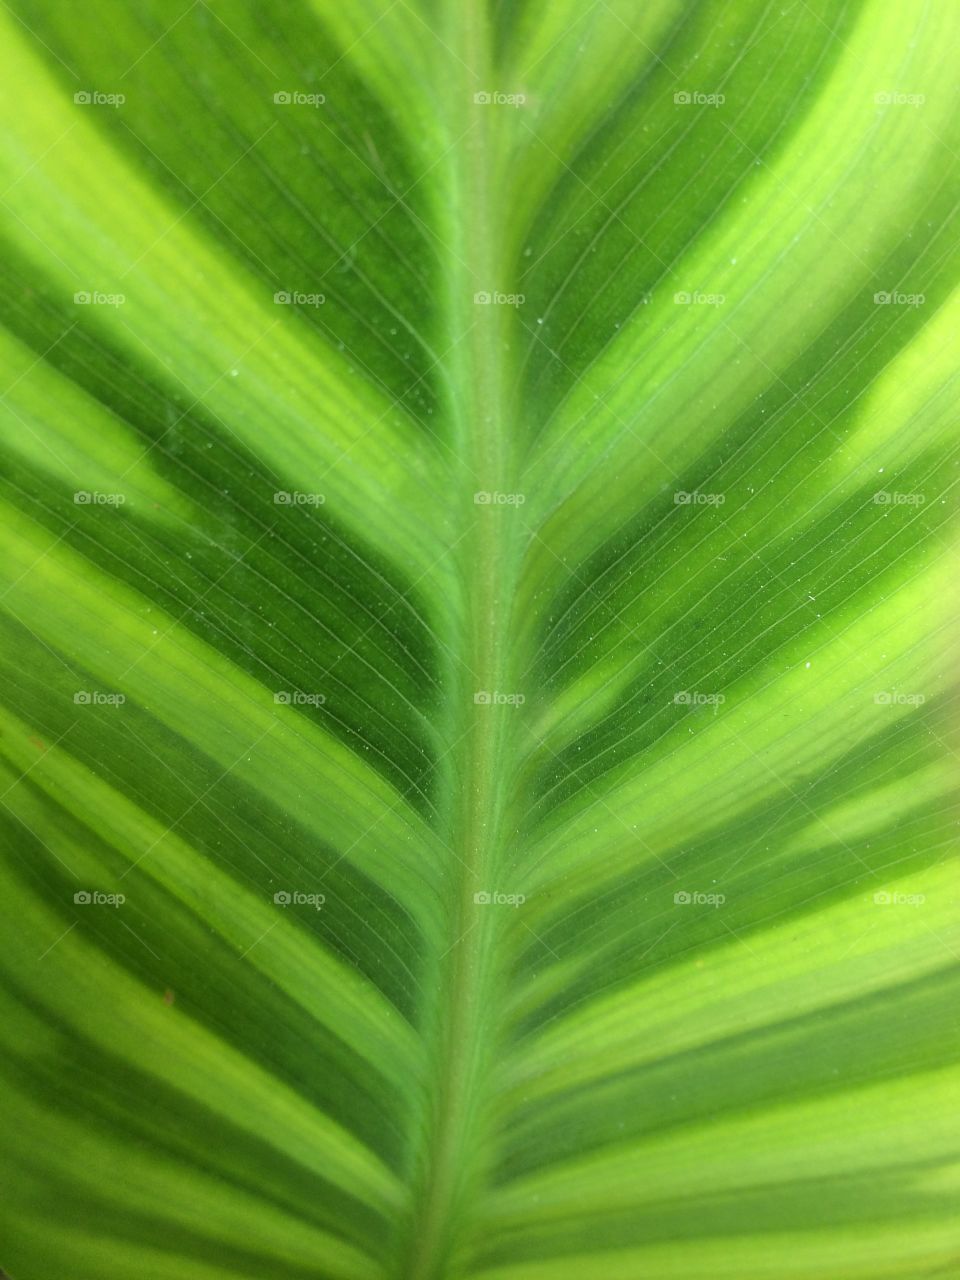 Abstract texture of leaf 